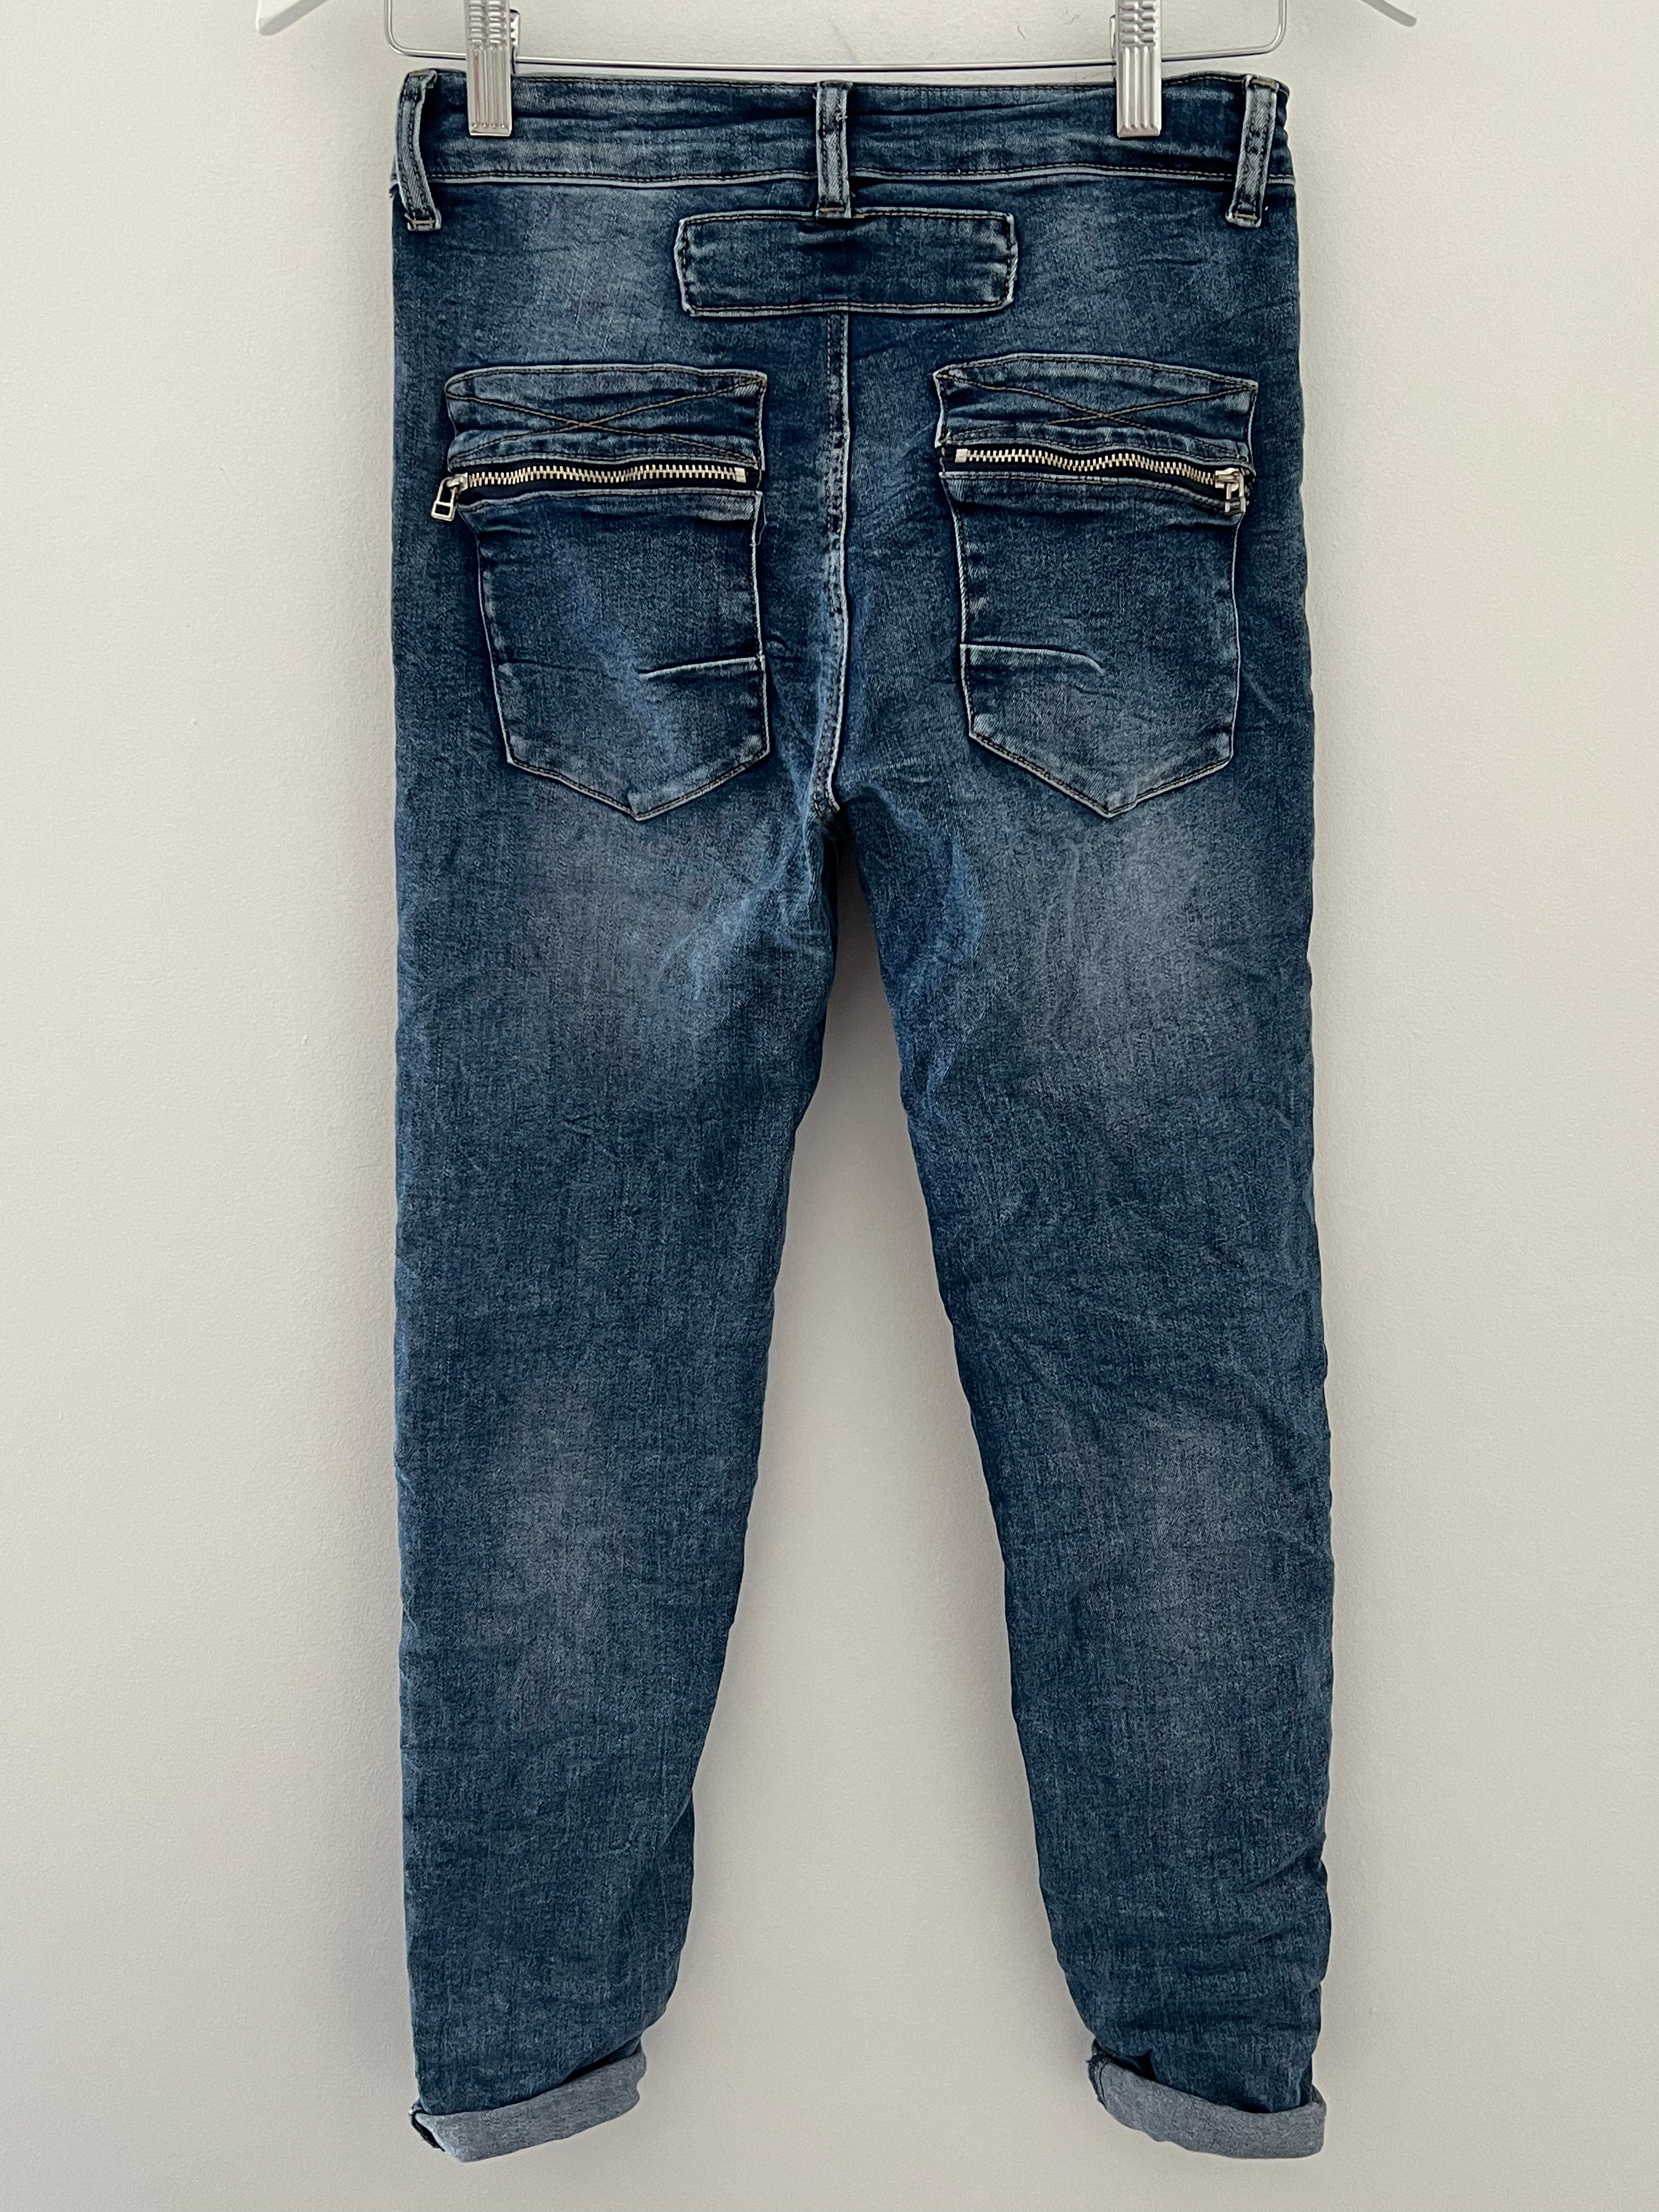 Button & Zip Fly Stretch Jeans in Mid Denim